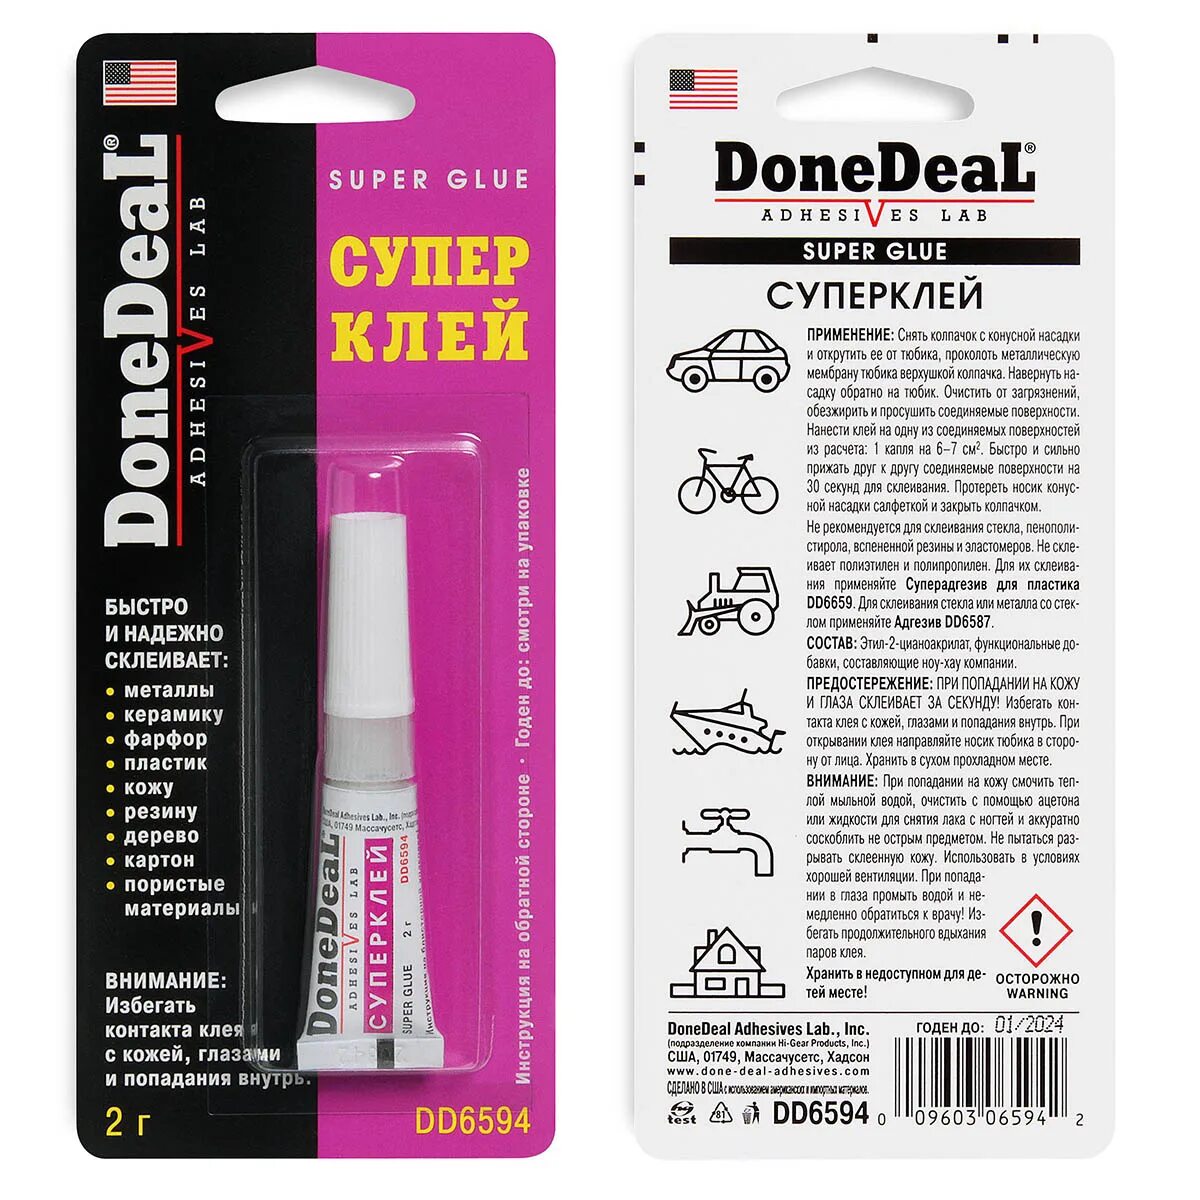 DONEDEAL от Adhesives Lab (DD 6733)герметик. Super Glue клей. DONEDEAL Adhesives Lab. DONEDEAL компаунд. Deal клей